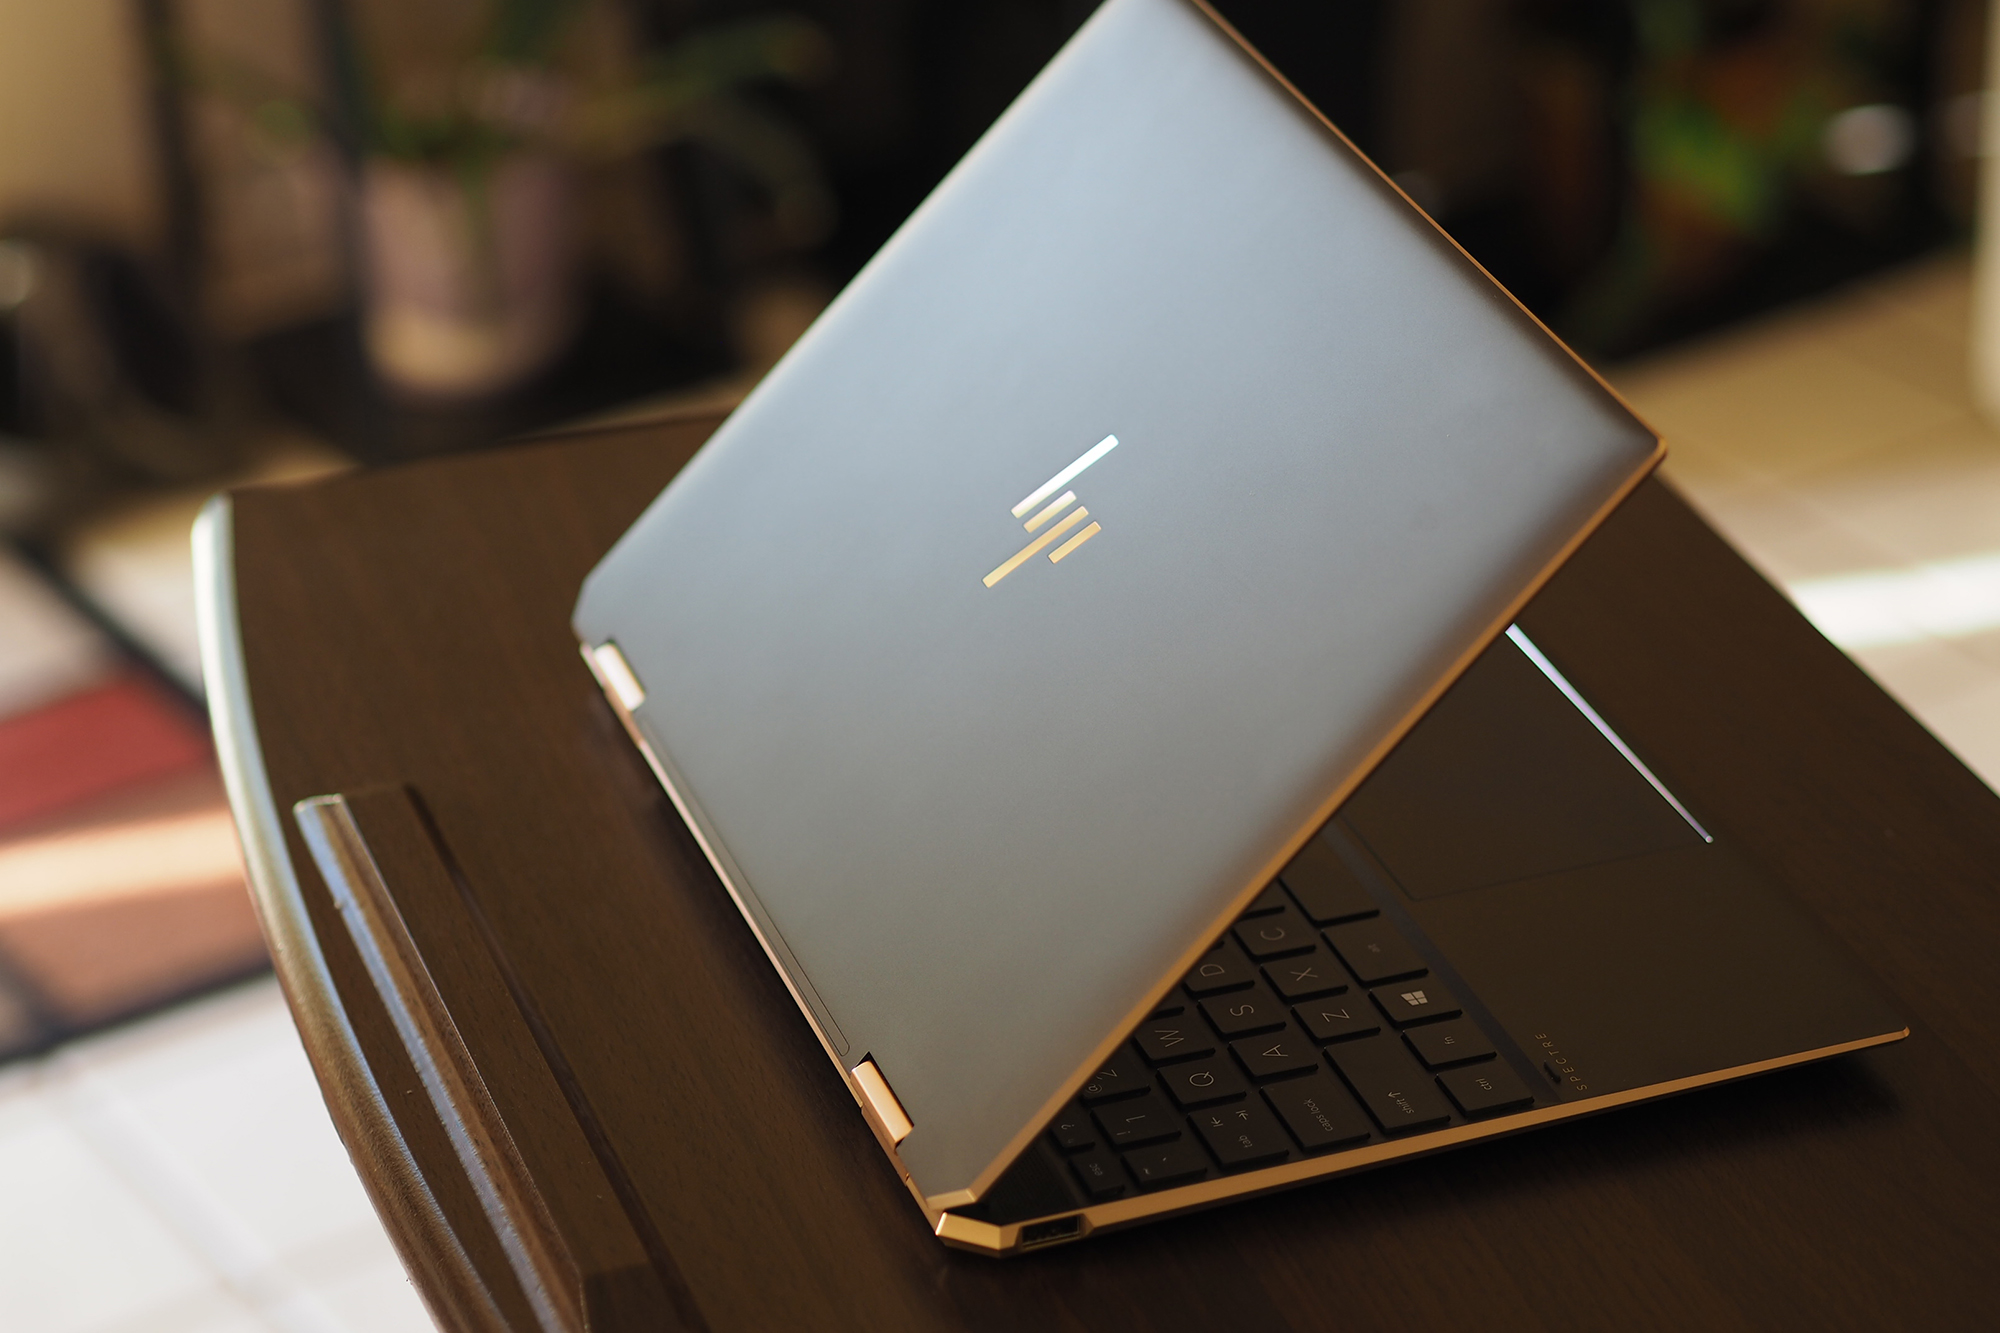 HP Spectre x360 14 Review: The 2-in-1 Convertible, Perfected